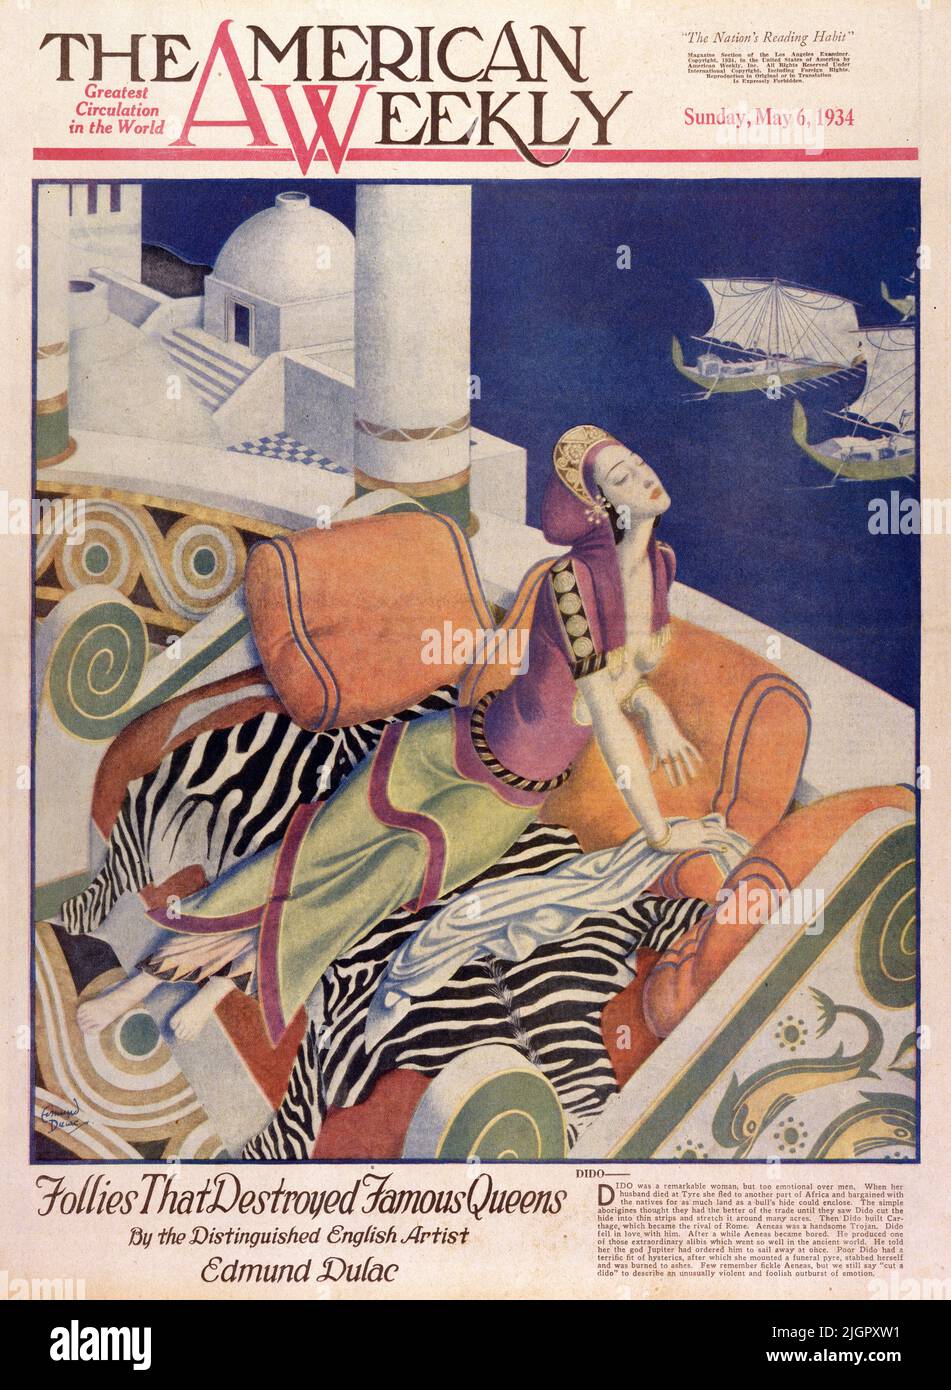 'Dido' published May 6,1934 in the American Weekly Sunday magazine painted by Edmund Dulac. Dido was a remarkable woman, but too emotional over men. When her husband died at Tyre she fled to another part of Africa and bargained with the natives for as much land as a bull’s hide could enclose. The simple aborigines thought they had the better of the trade until they saw Dido cut the hide into thin strips and stretch it around many acres. Then Dido built Carthage, which became the rival of Rome. Aeneas was a handsome Trojan. Dido fell in love with him.After a while Aeneas became bored. Stock Photo